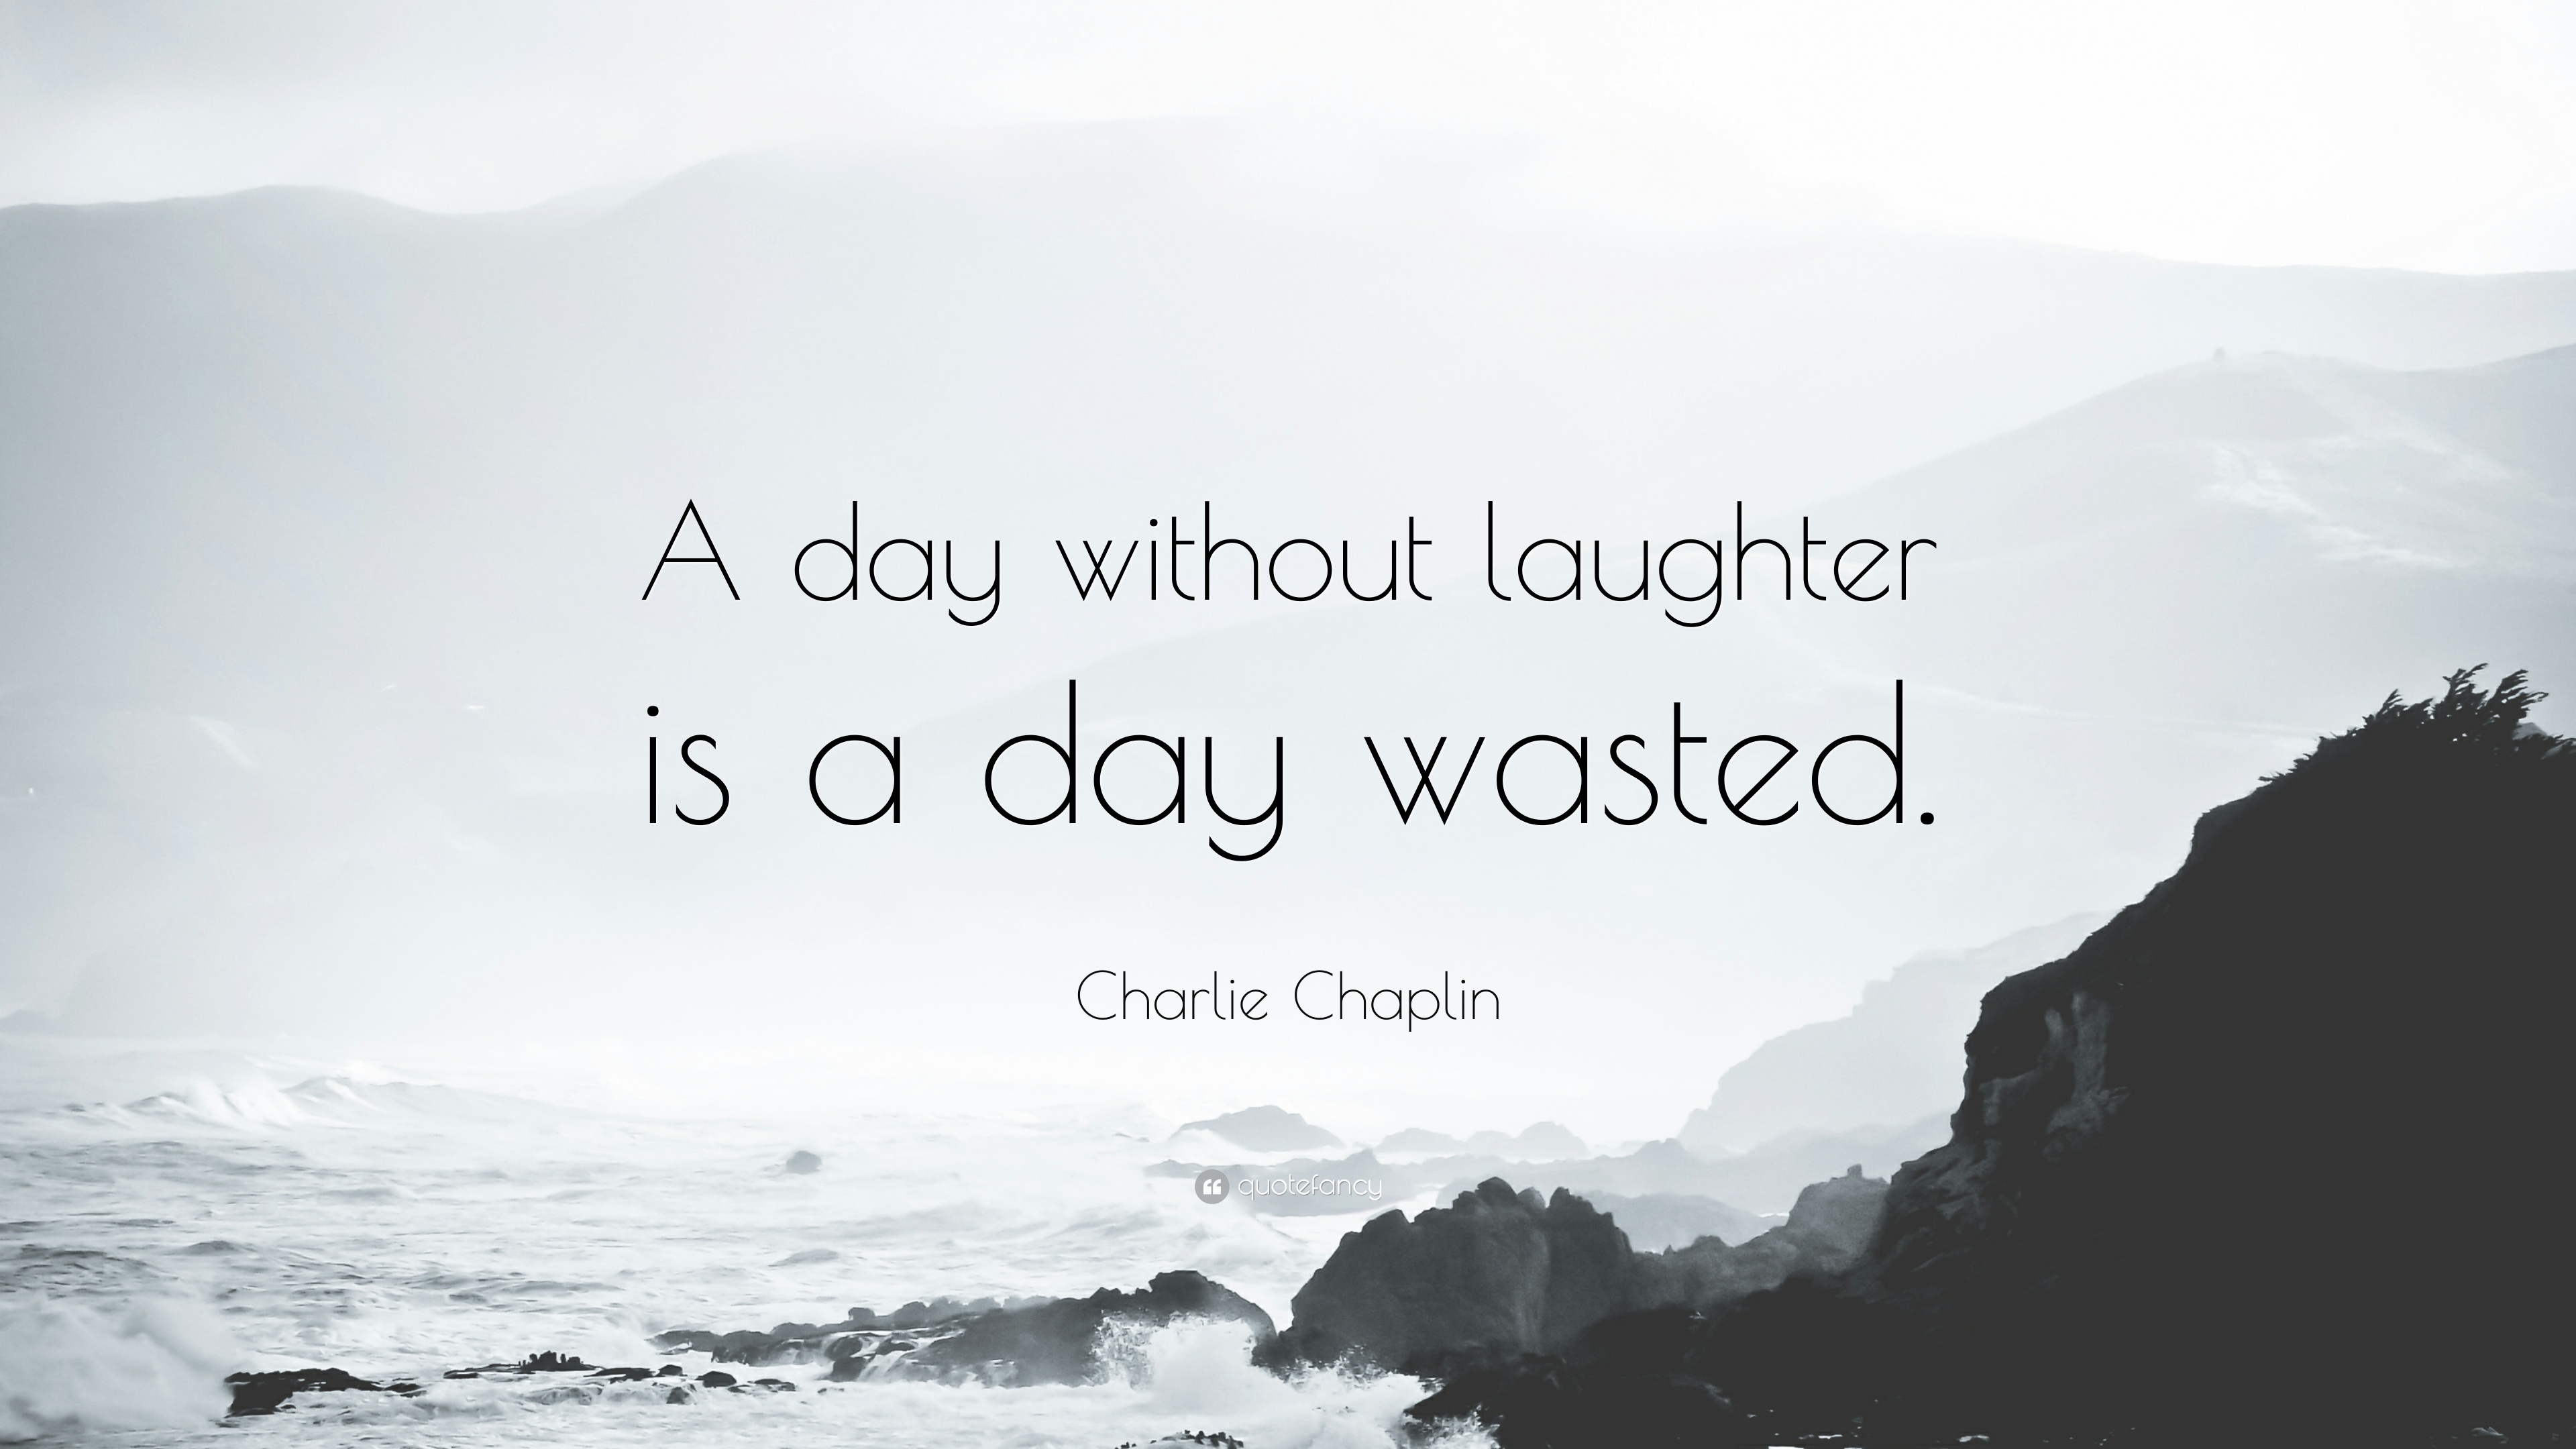 charlie-chaplin-quote-a-day-without-laughter-is-a-day-wasted